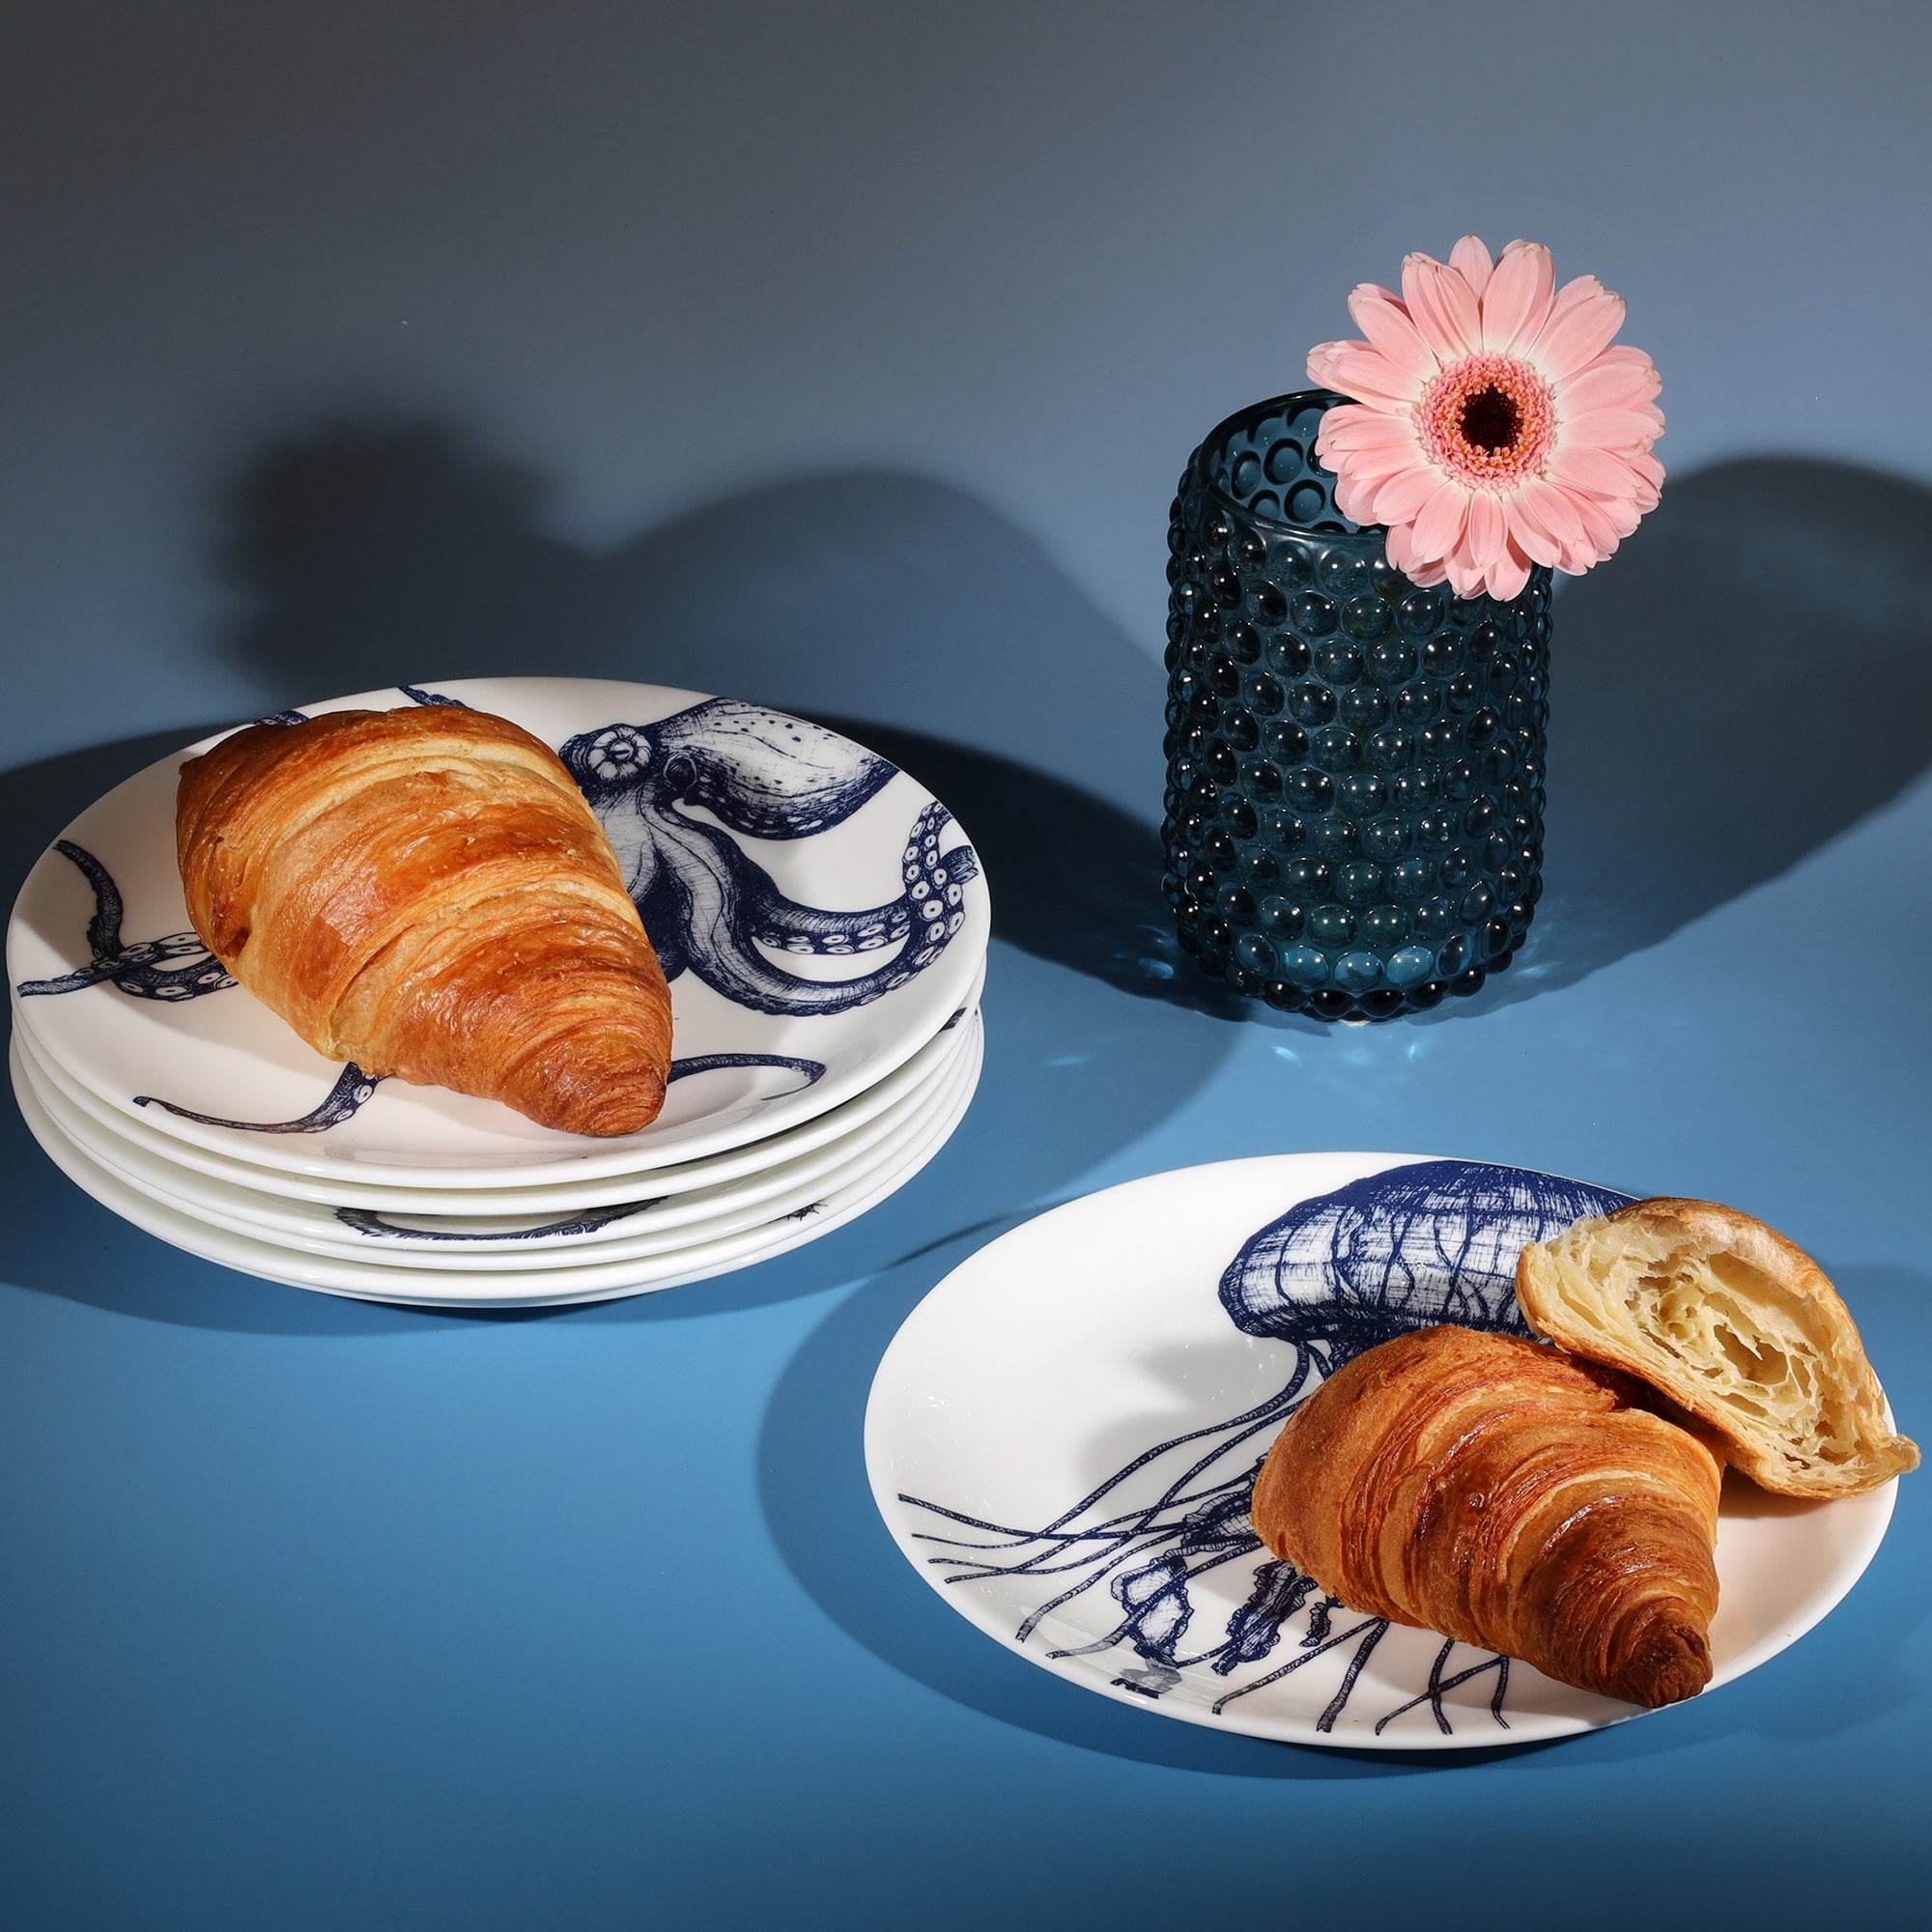 Stacked bone china side plates decorated with croissants next to a petrol blue candle holder